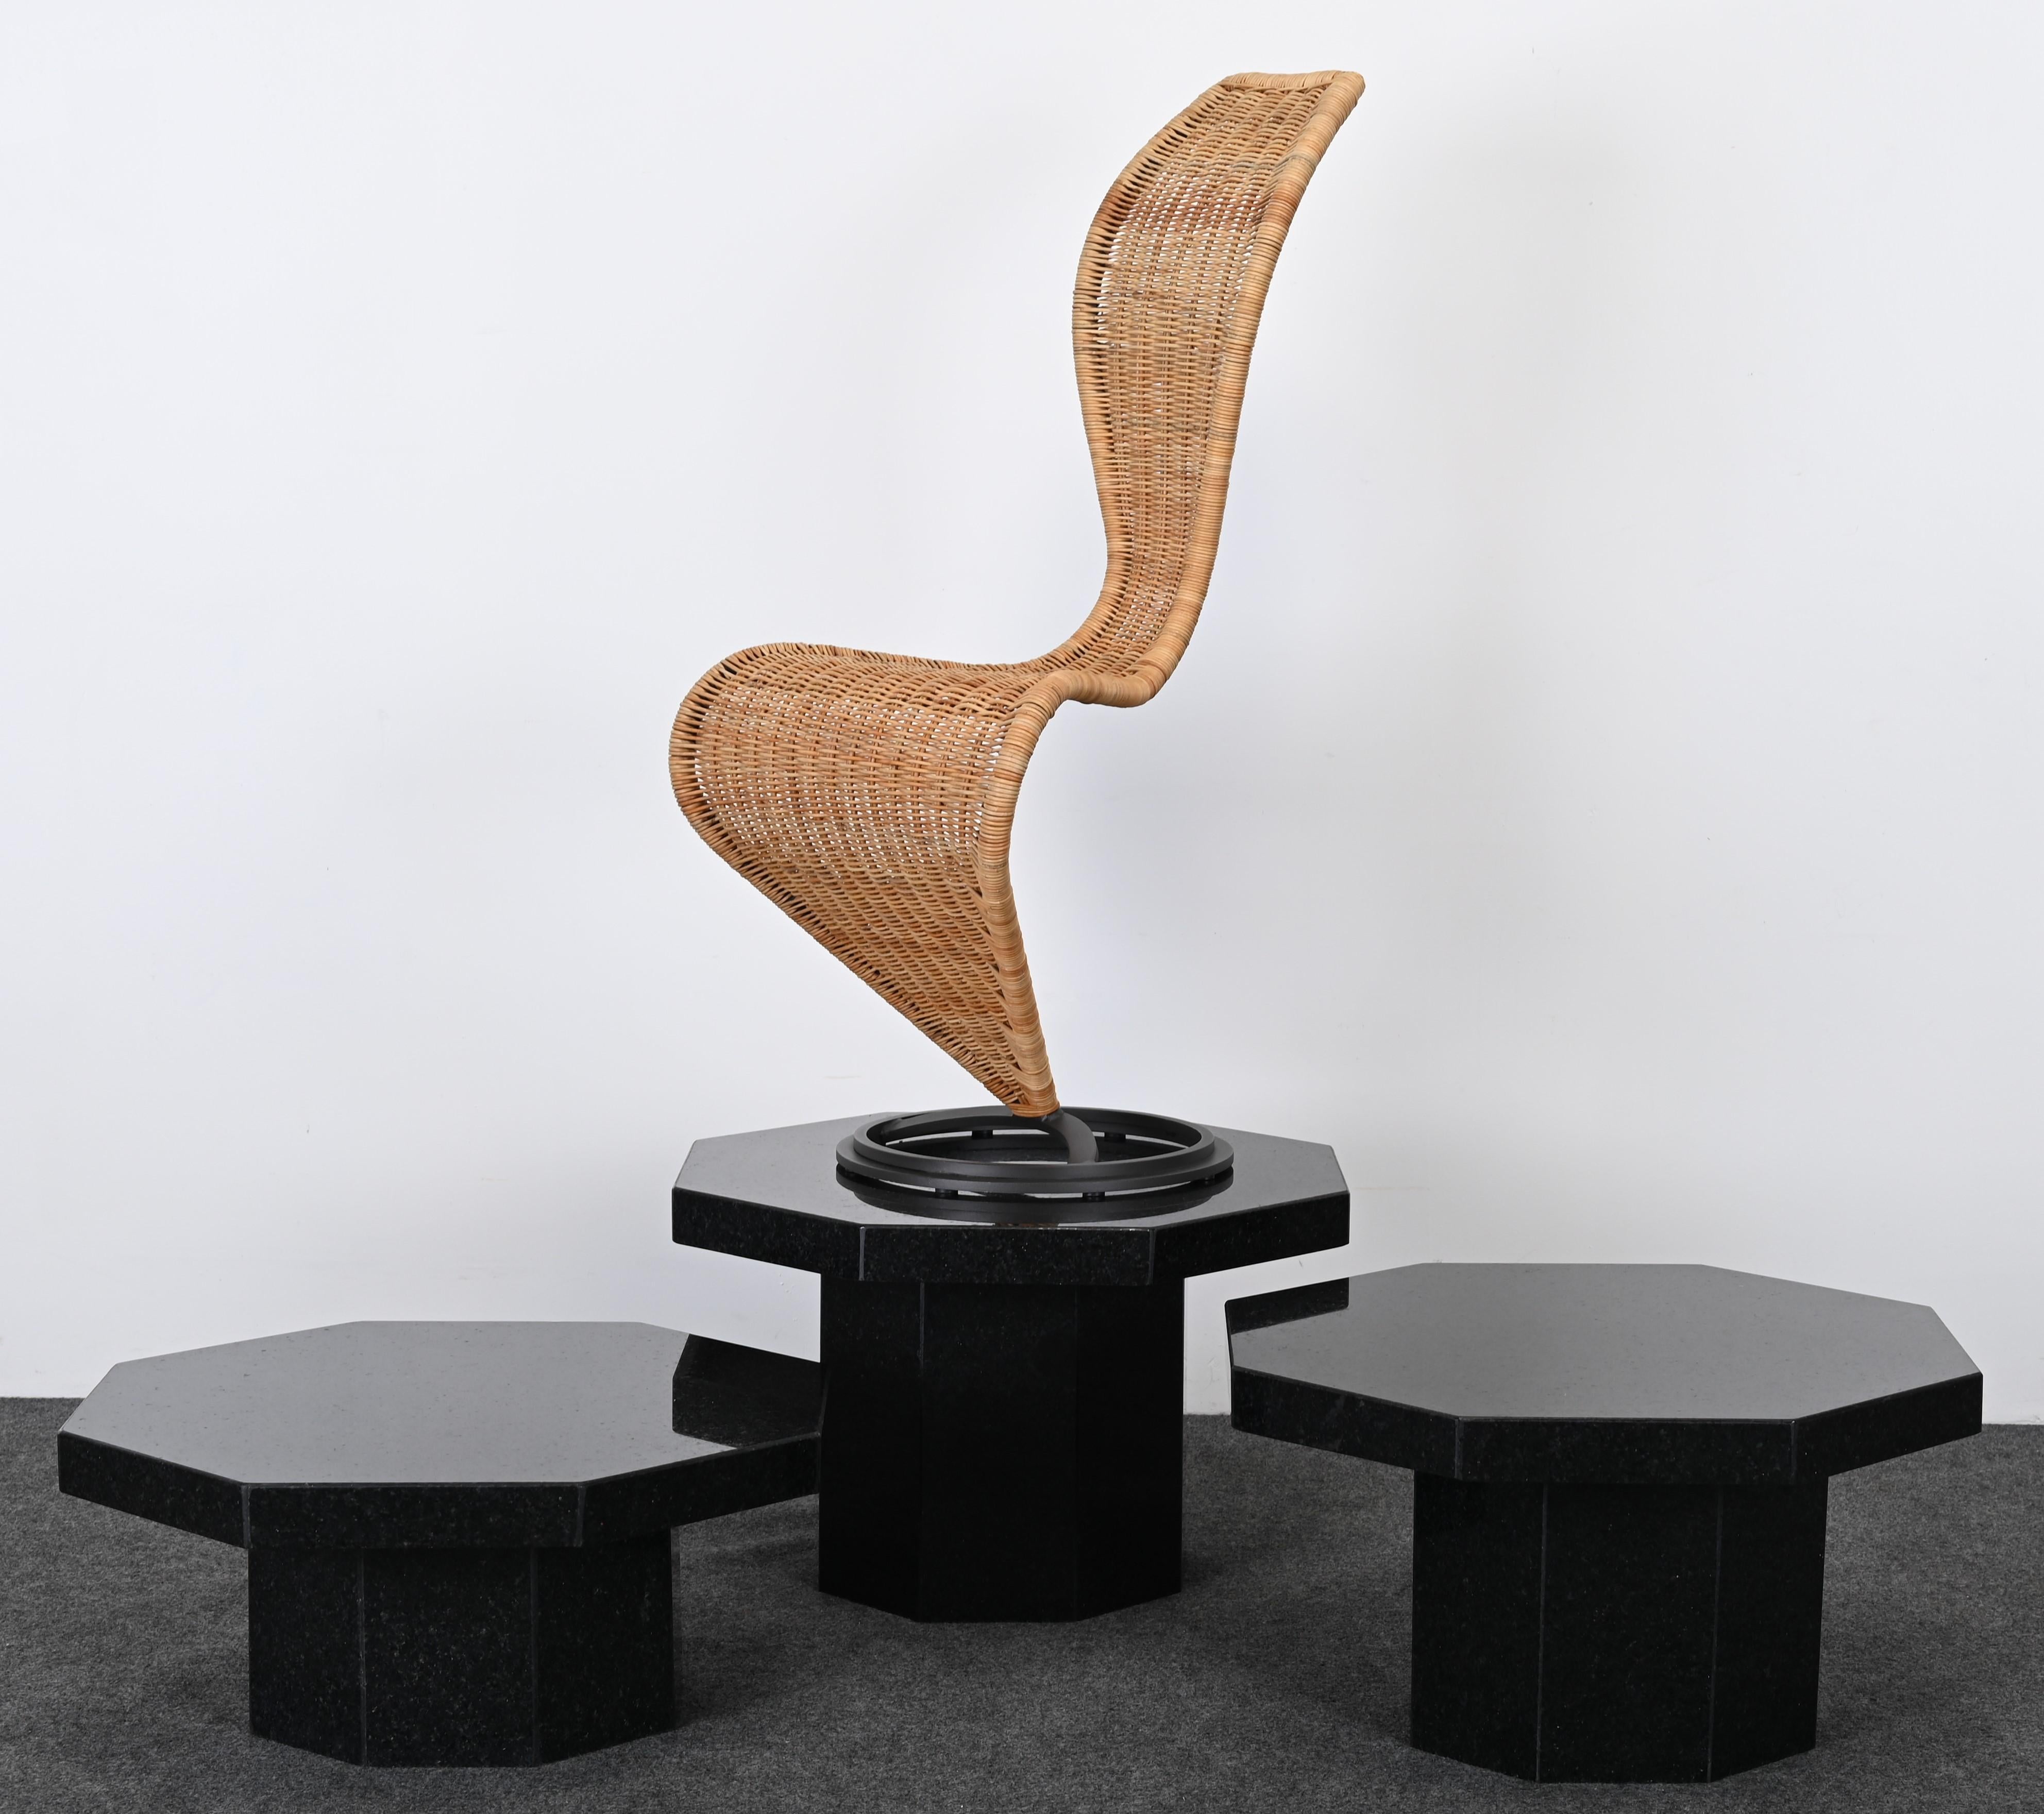 A wonderful Tom Dixon S-chair with Marsh Wicker for Cappellini. This iconic chair would look great in any Modern or Contemporary interior. Great accent piece. Available for purchase today. Octagonal pedestals shown in the images are available in